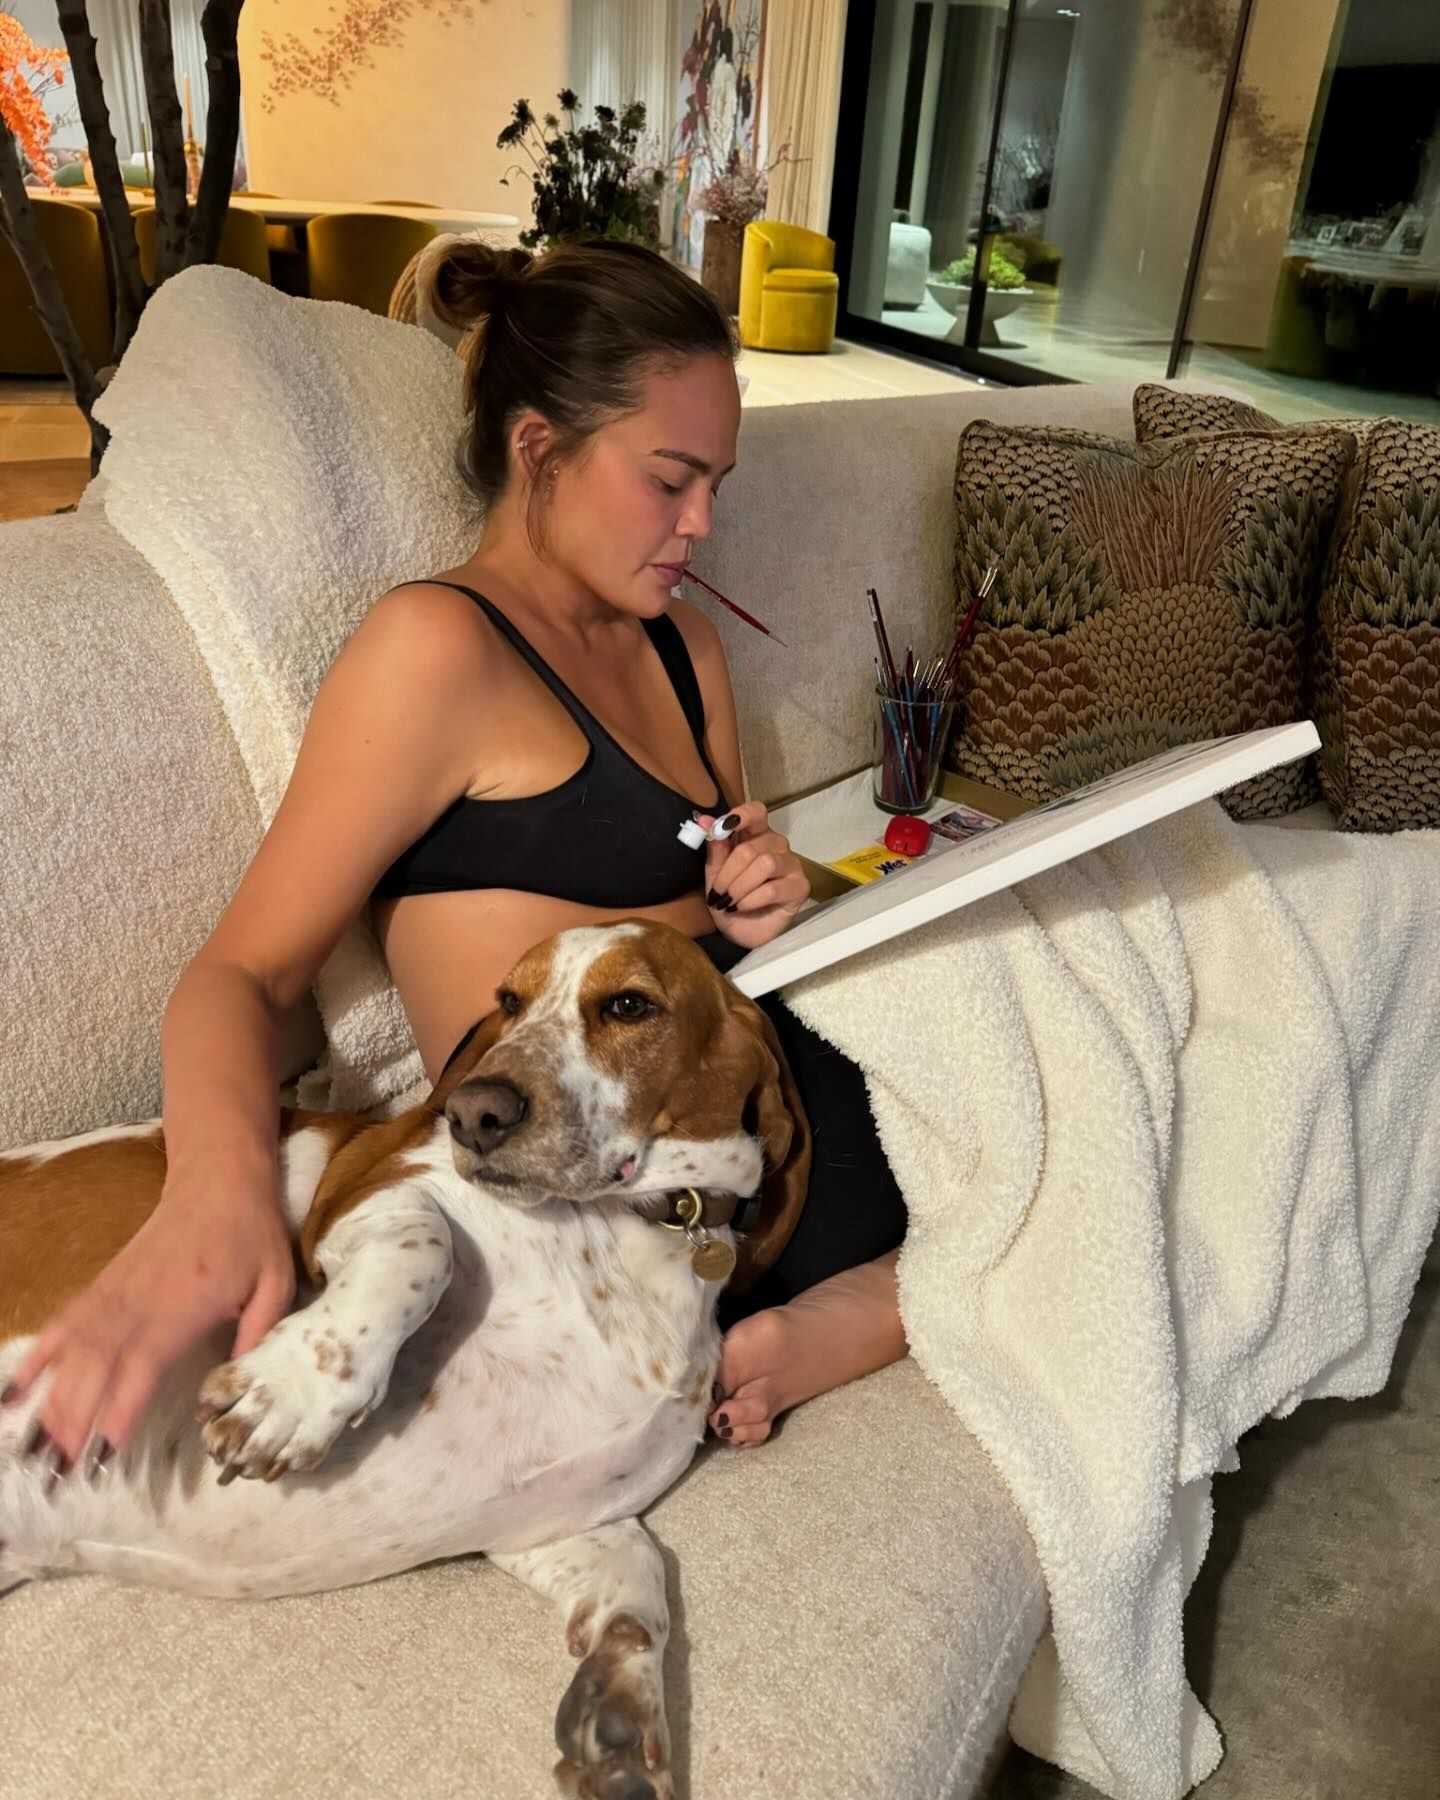 Chrissy shared a peek into her home life as she sat on the sofa with one of her pet companions